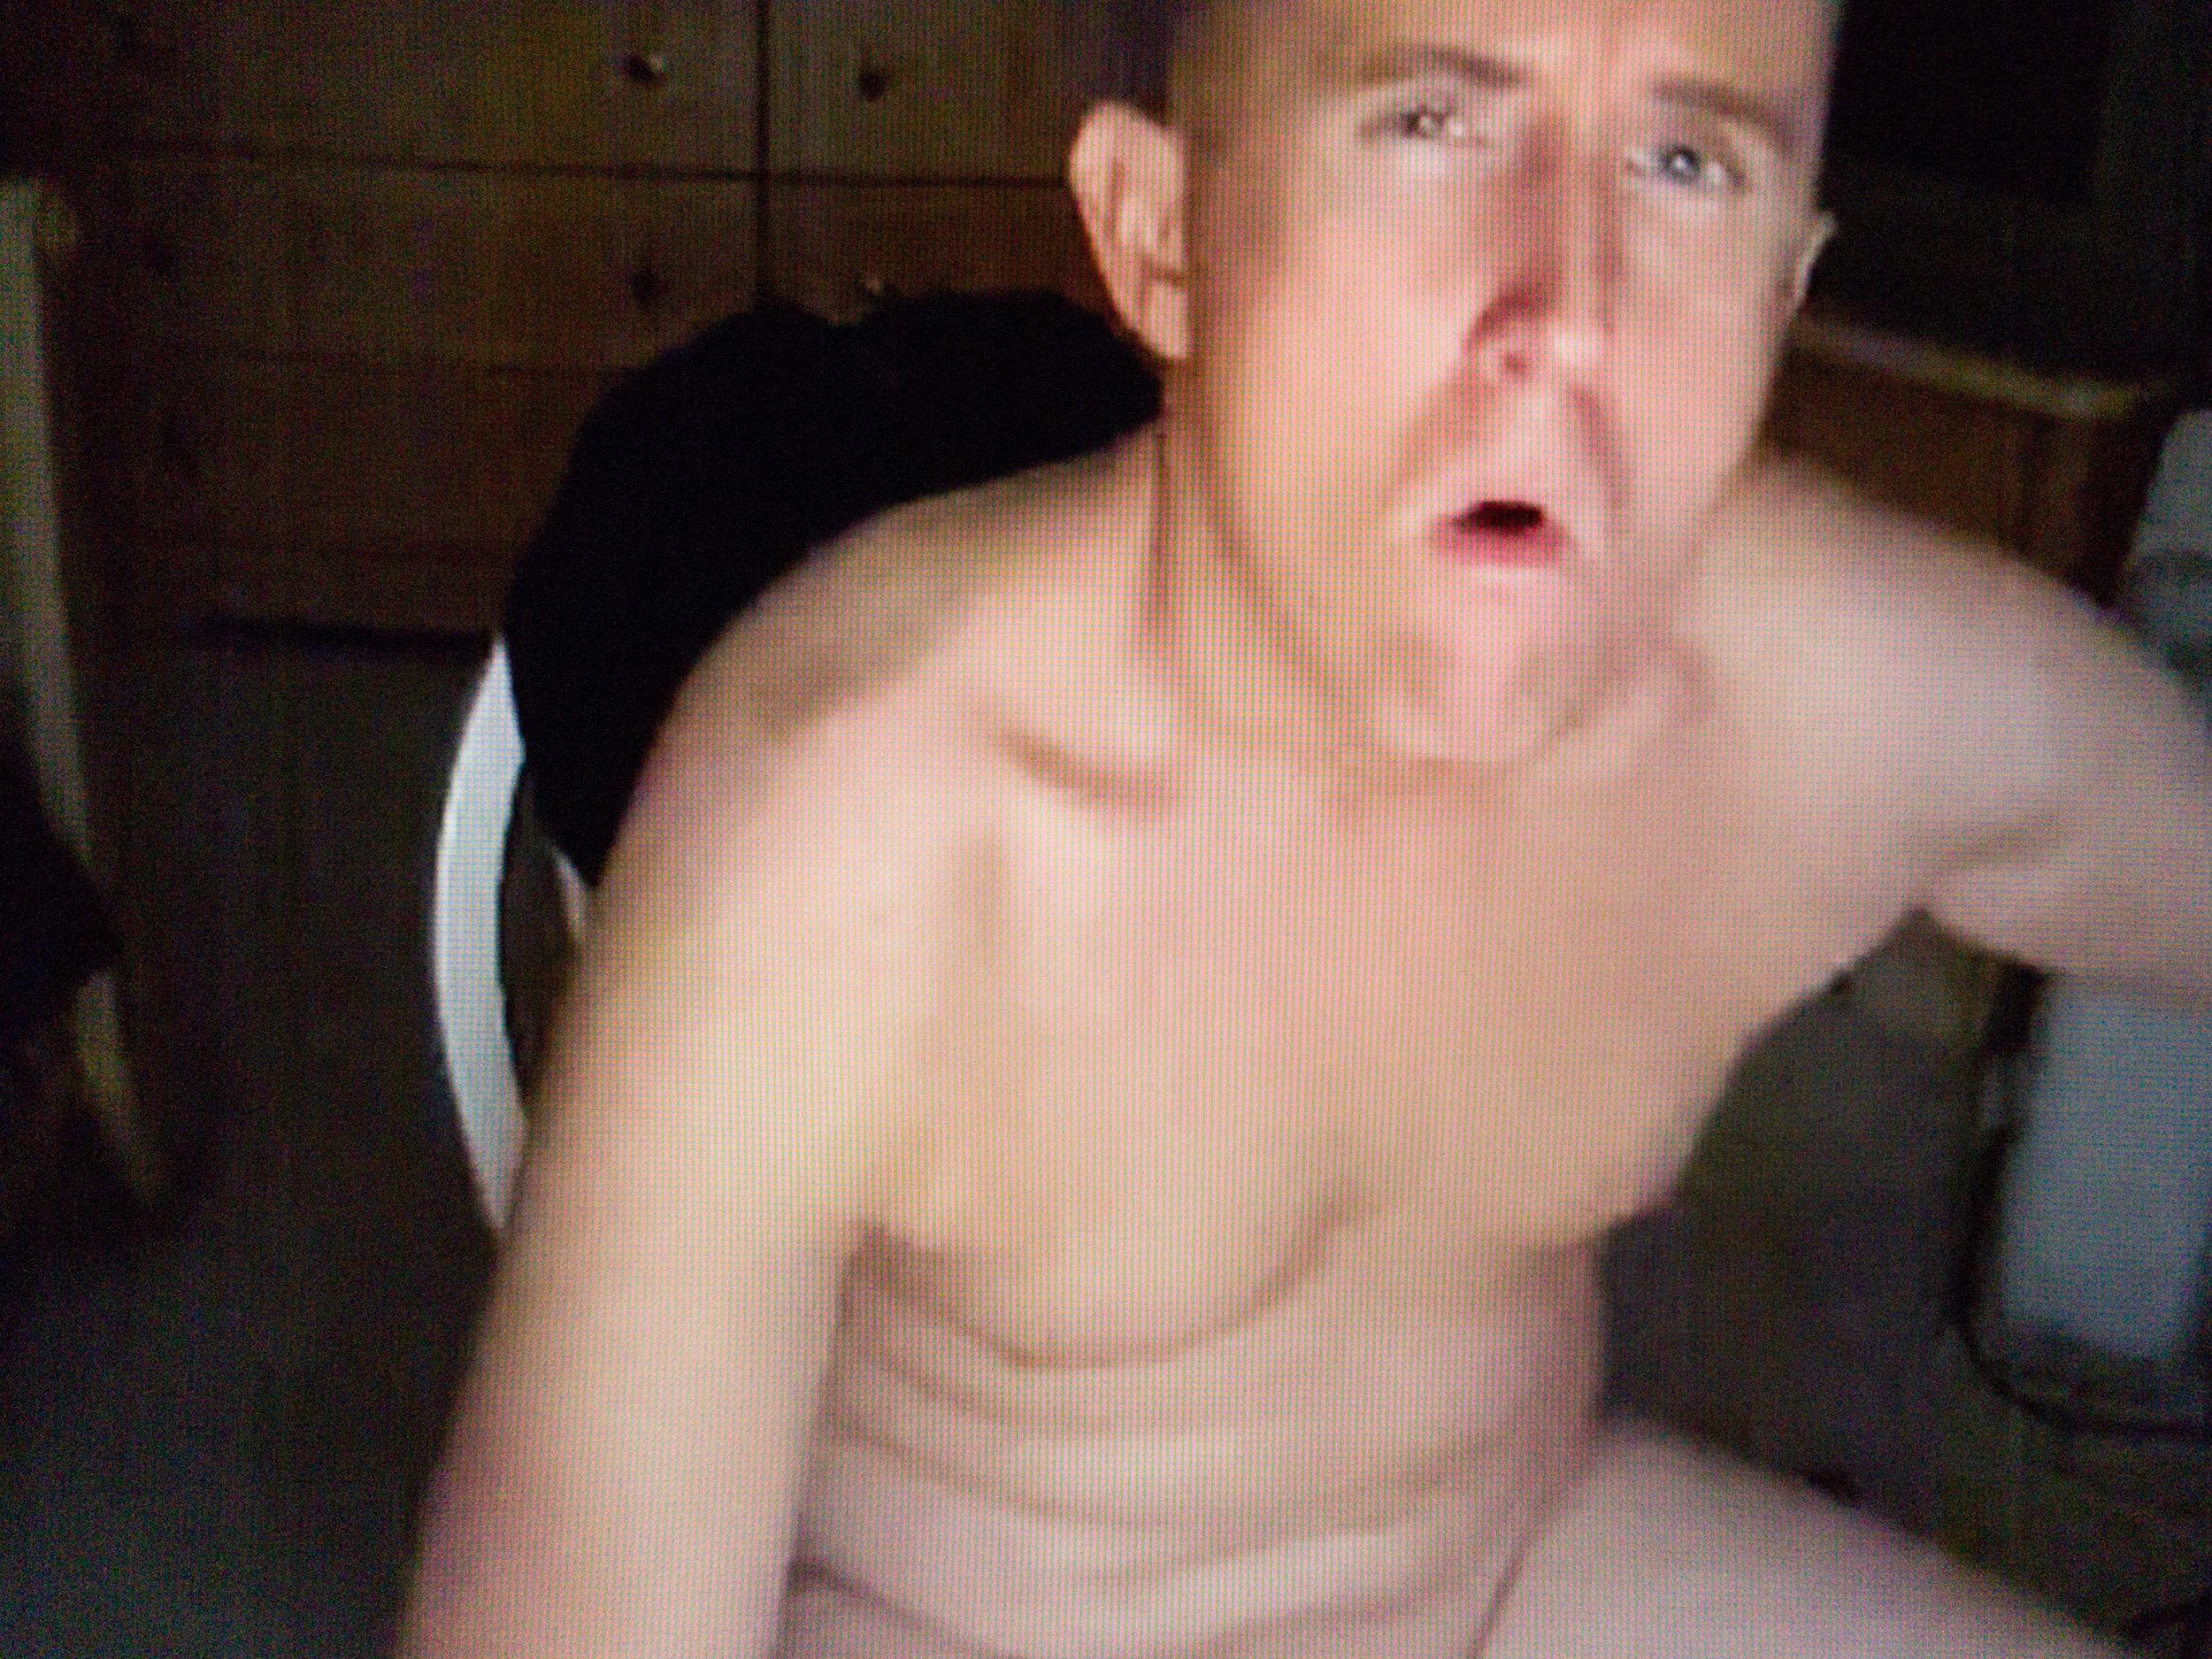 A buff, naked, young man sits on a chair in a darkened room. He looks directly into the camera and is opening his mouth in preparation for exhaling smoke.